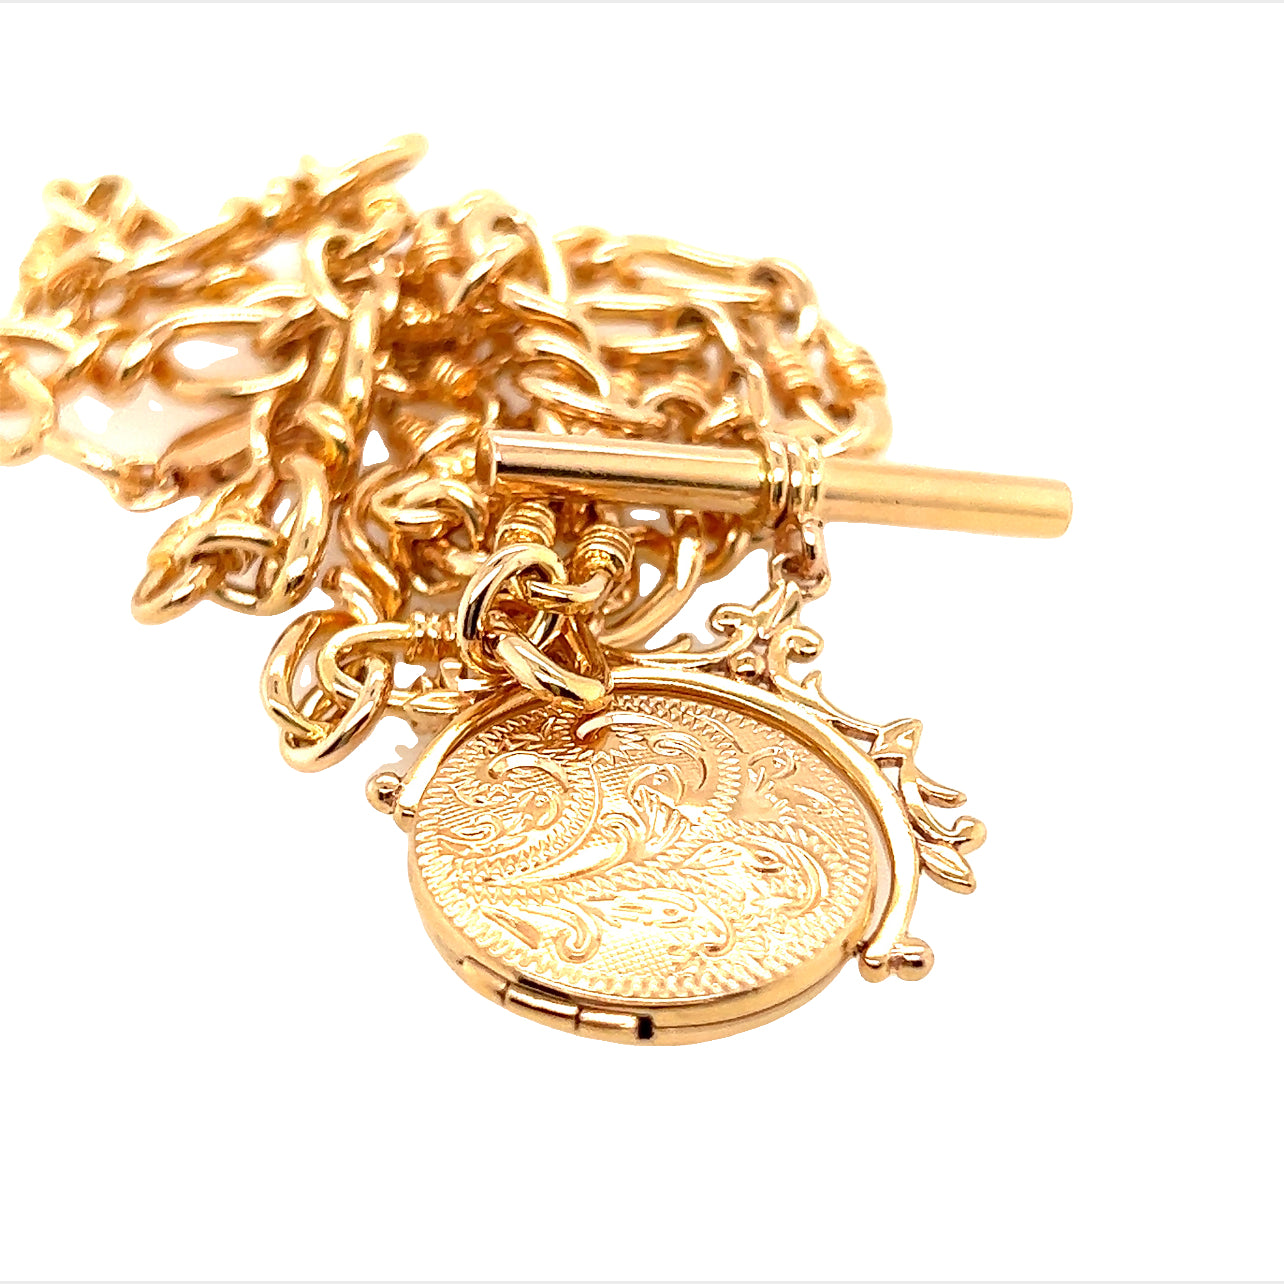 Gold Fancy Link Chain with Fob Bar and Spinner Pendant